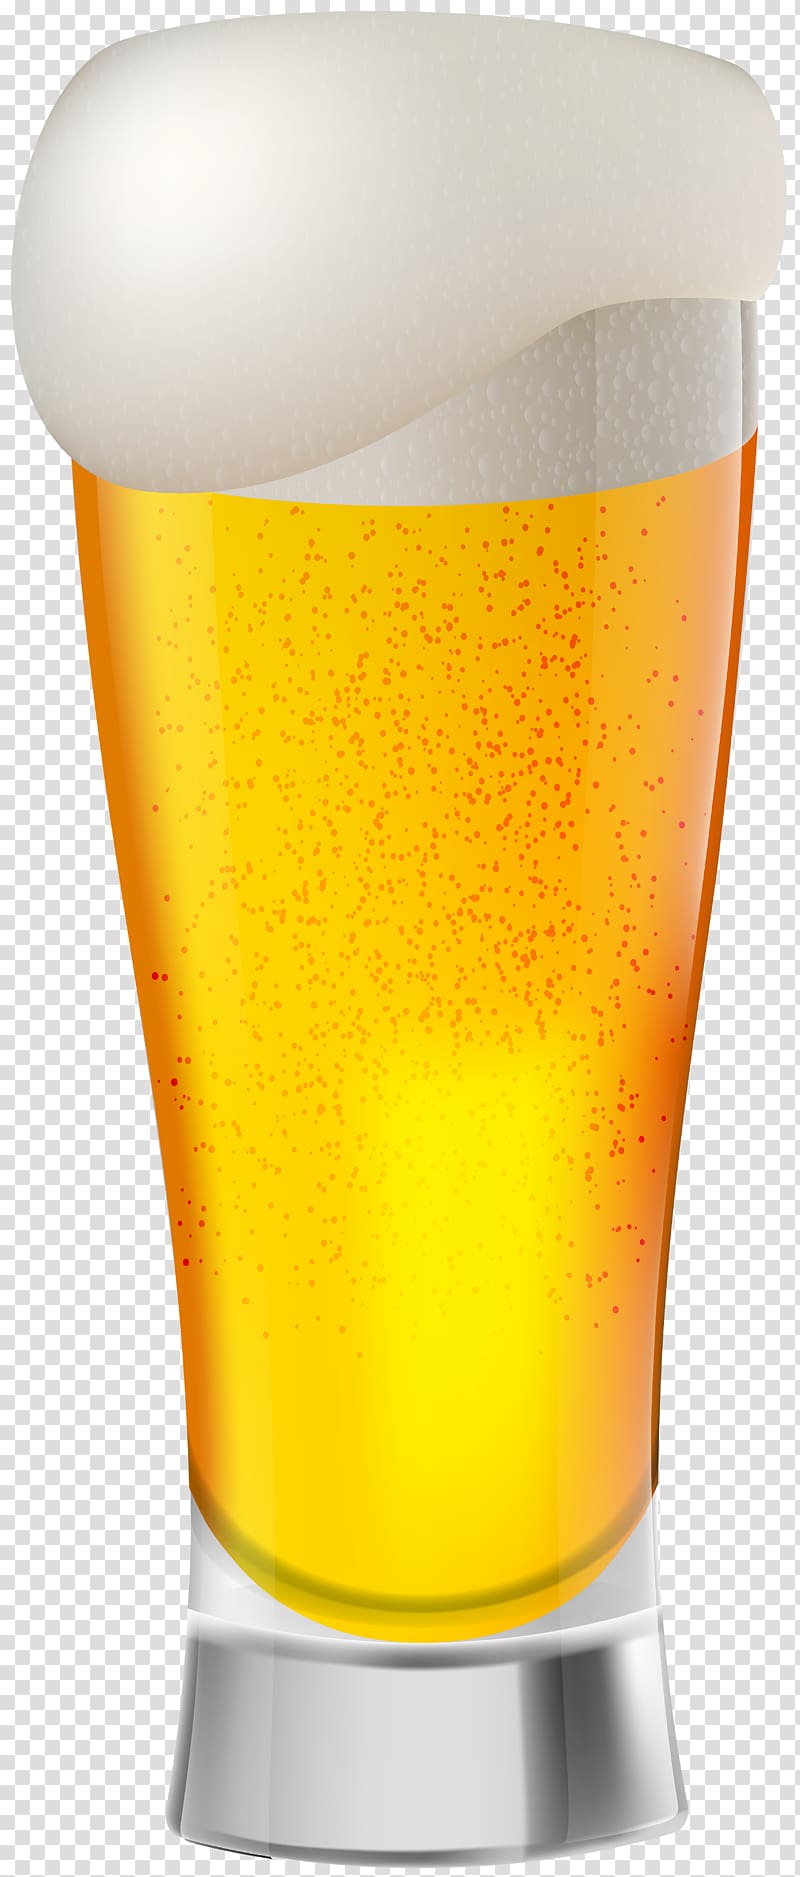 Beer Glasses Portable Network Graphics Imperial pint, beer transparent background PNG clipart